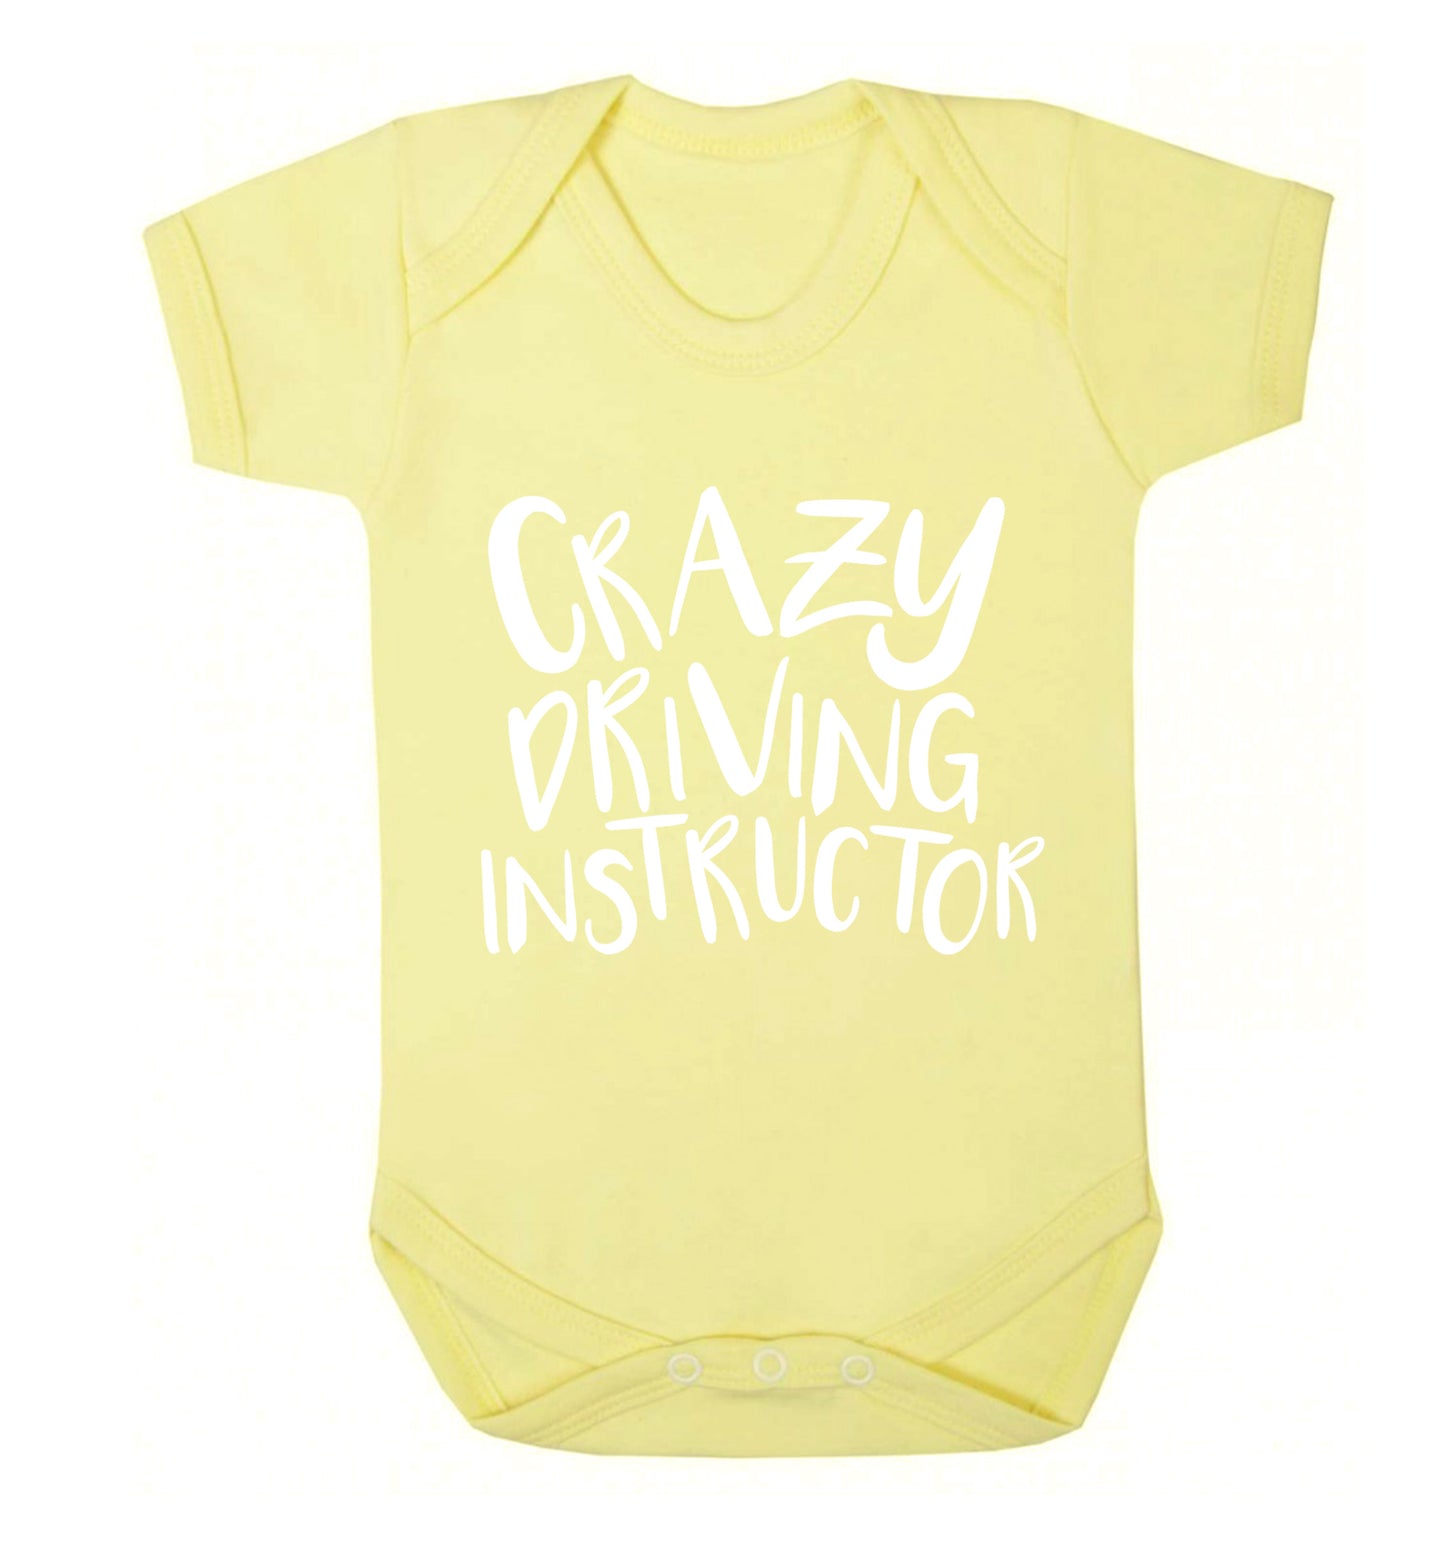 Crazy driving instructor Baby Vest pale yellow 18-24 months